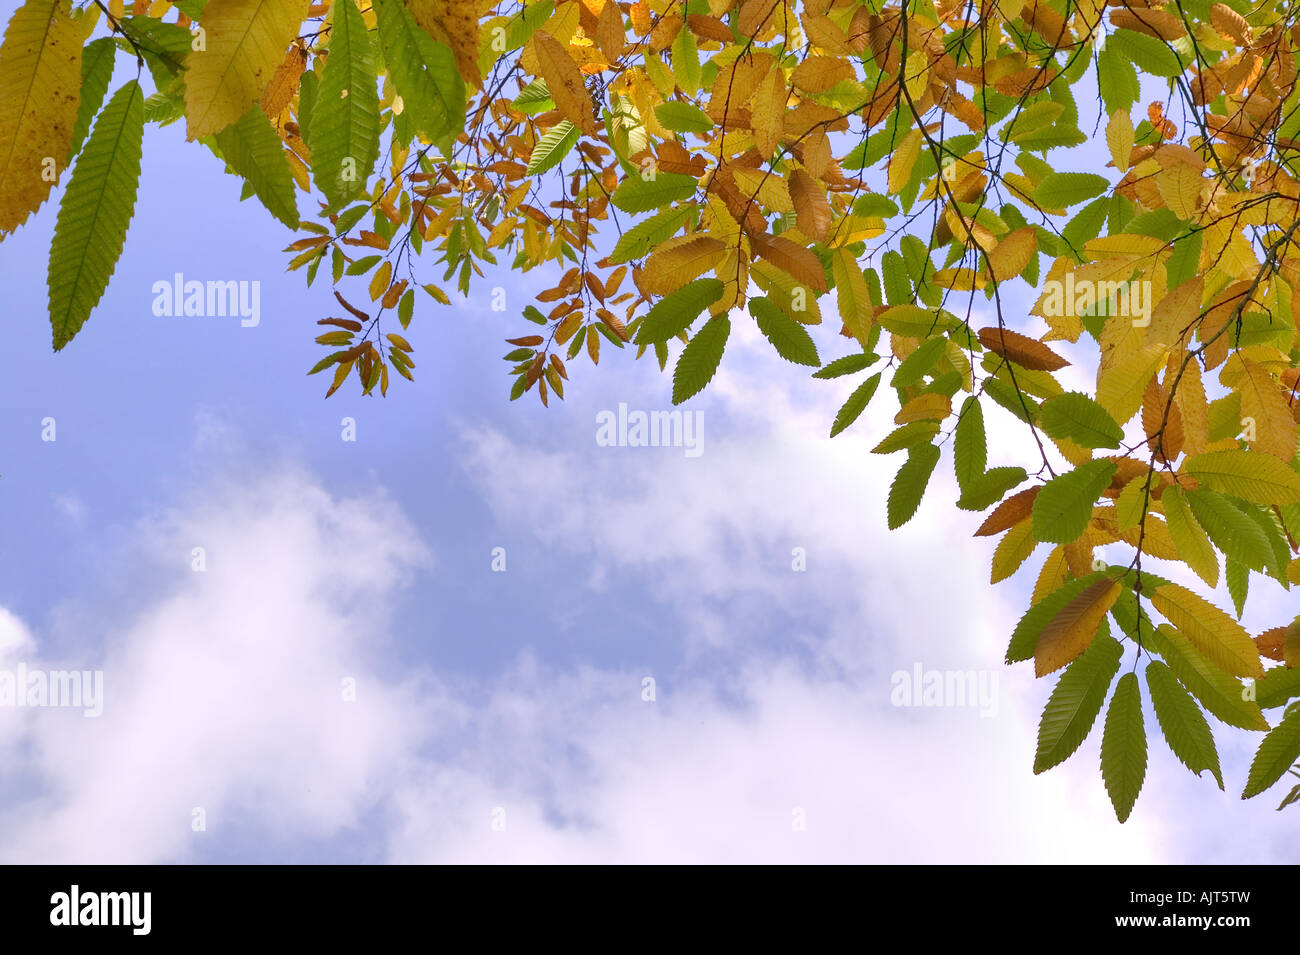 Horse chestnut leaves in Autumn against a bright blue cloudy sky Stock Photo